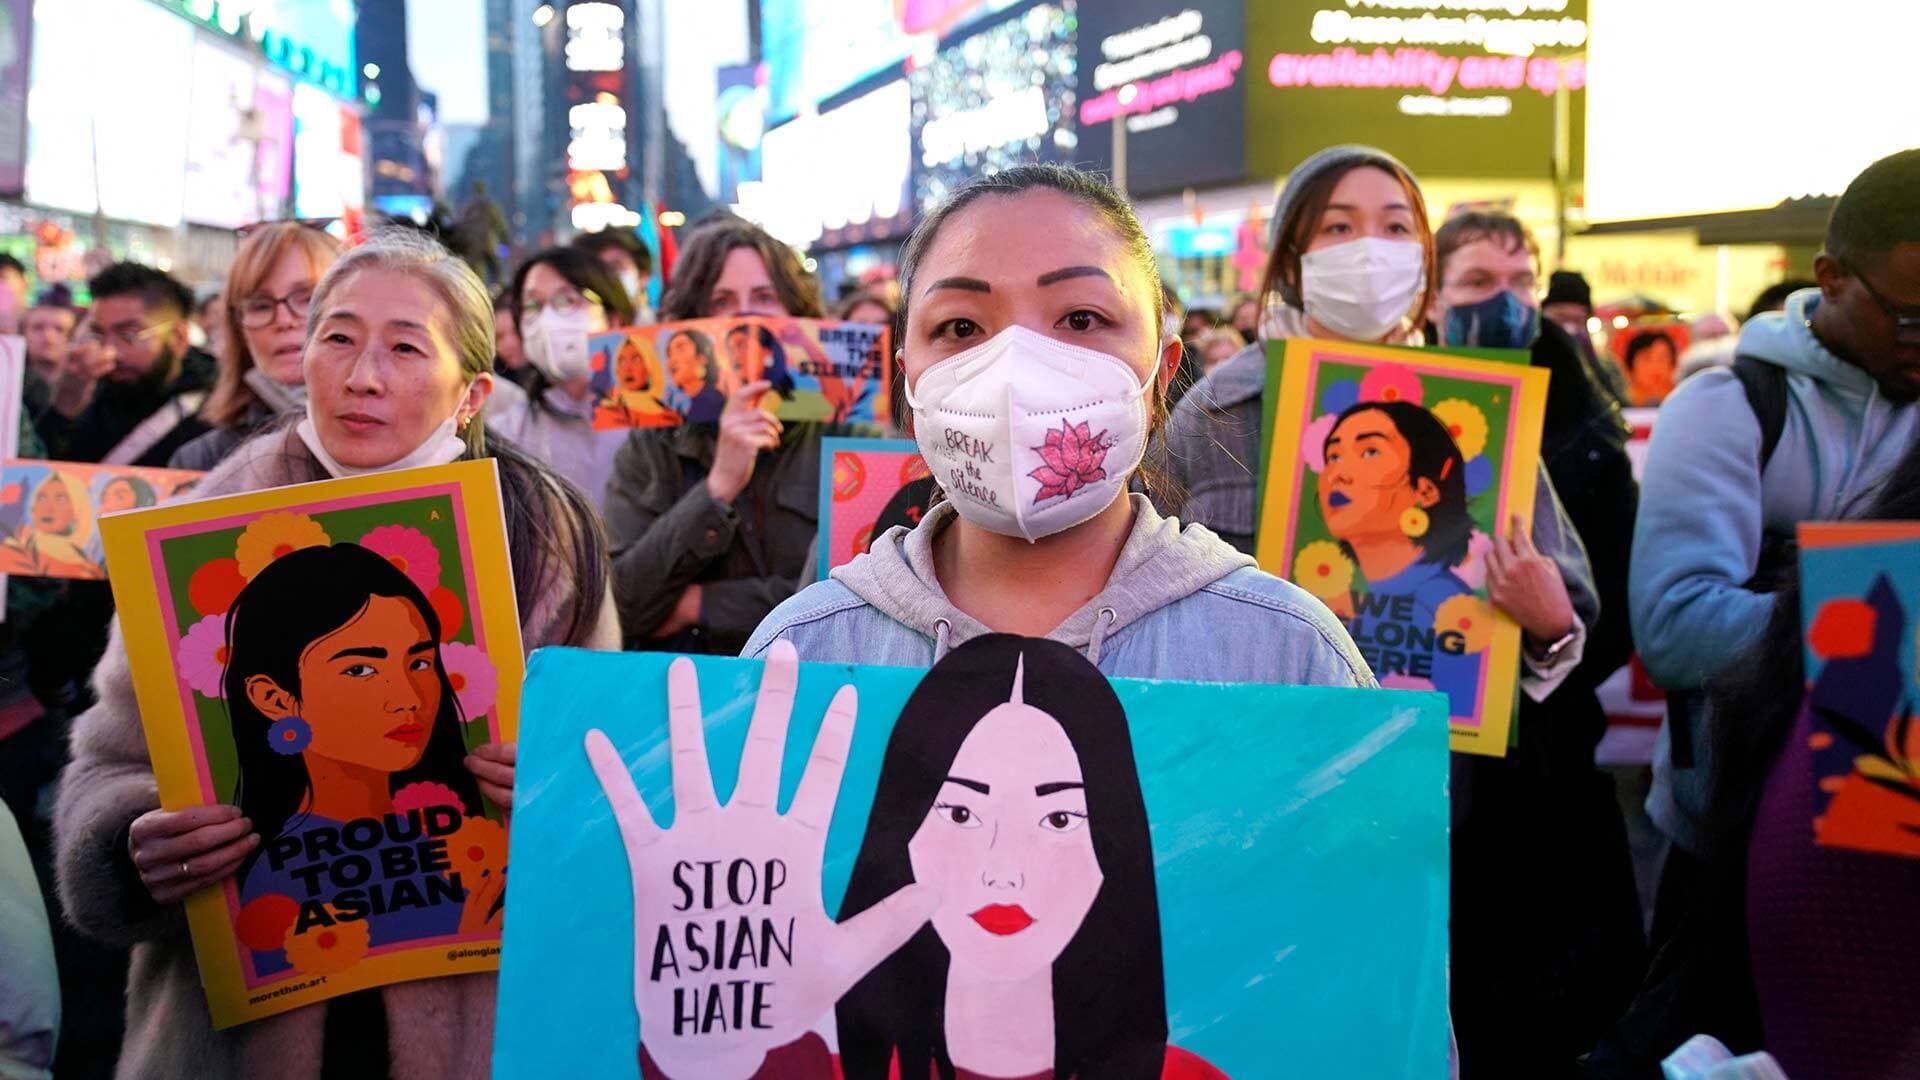 "Stop Asian Hate" protest in Times Square